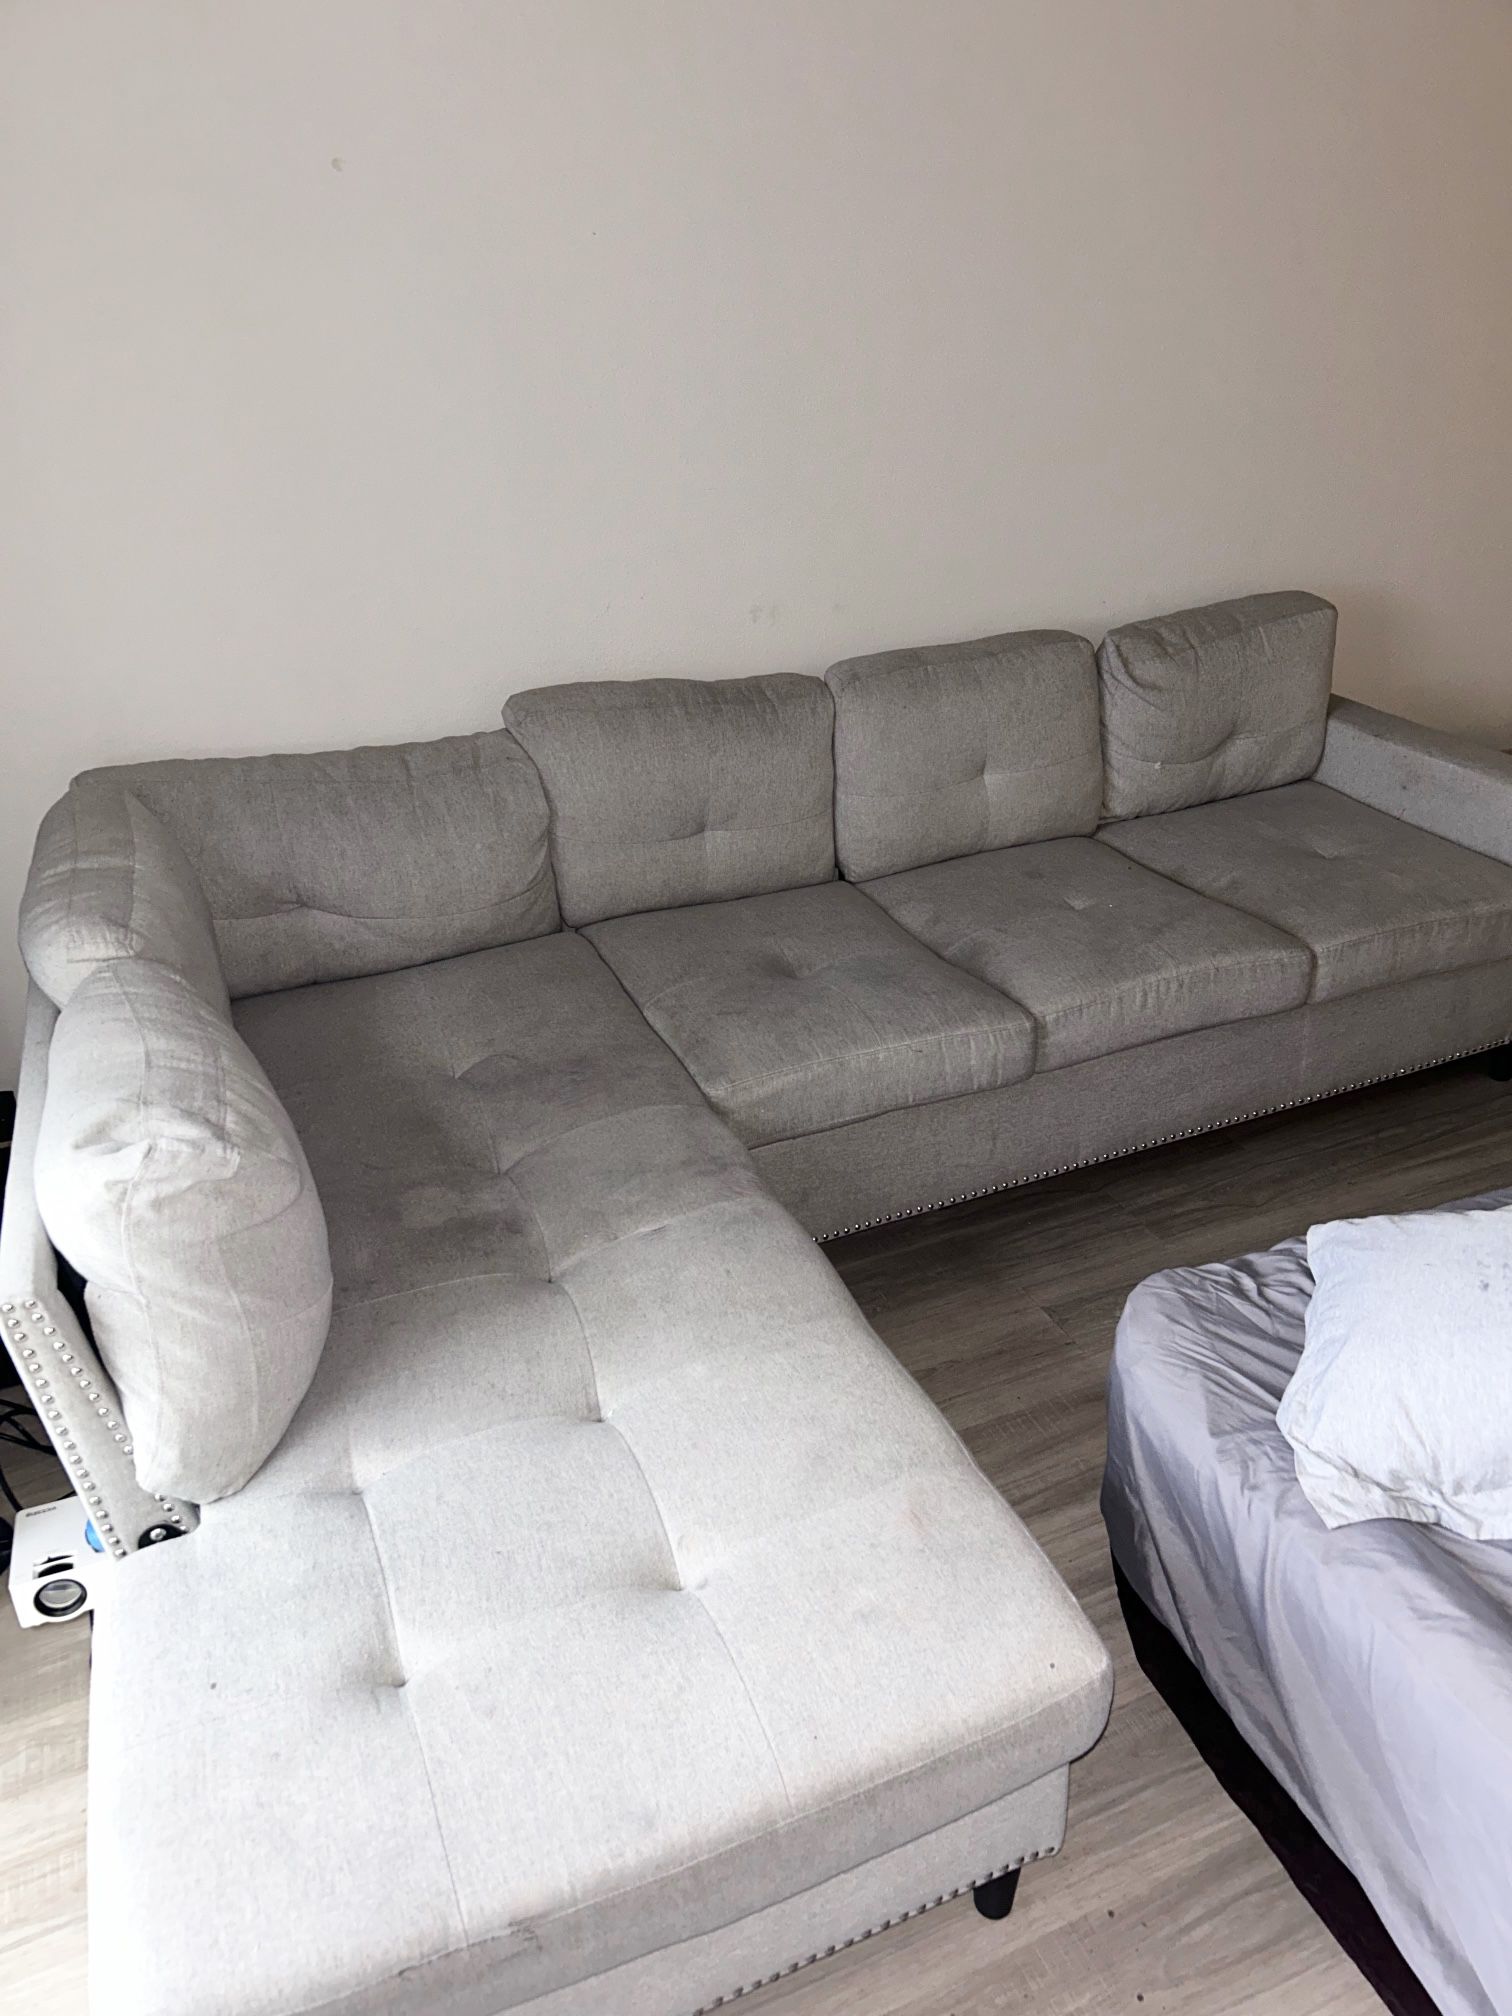 Light Grey Couch (brand new)